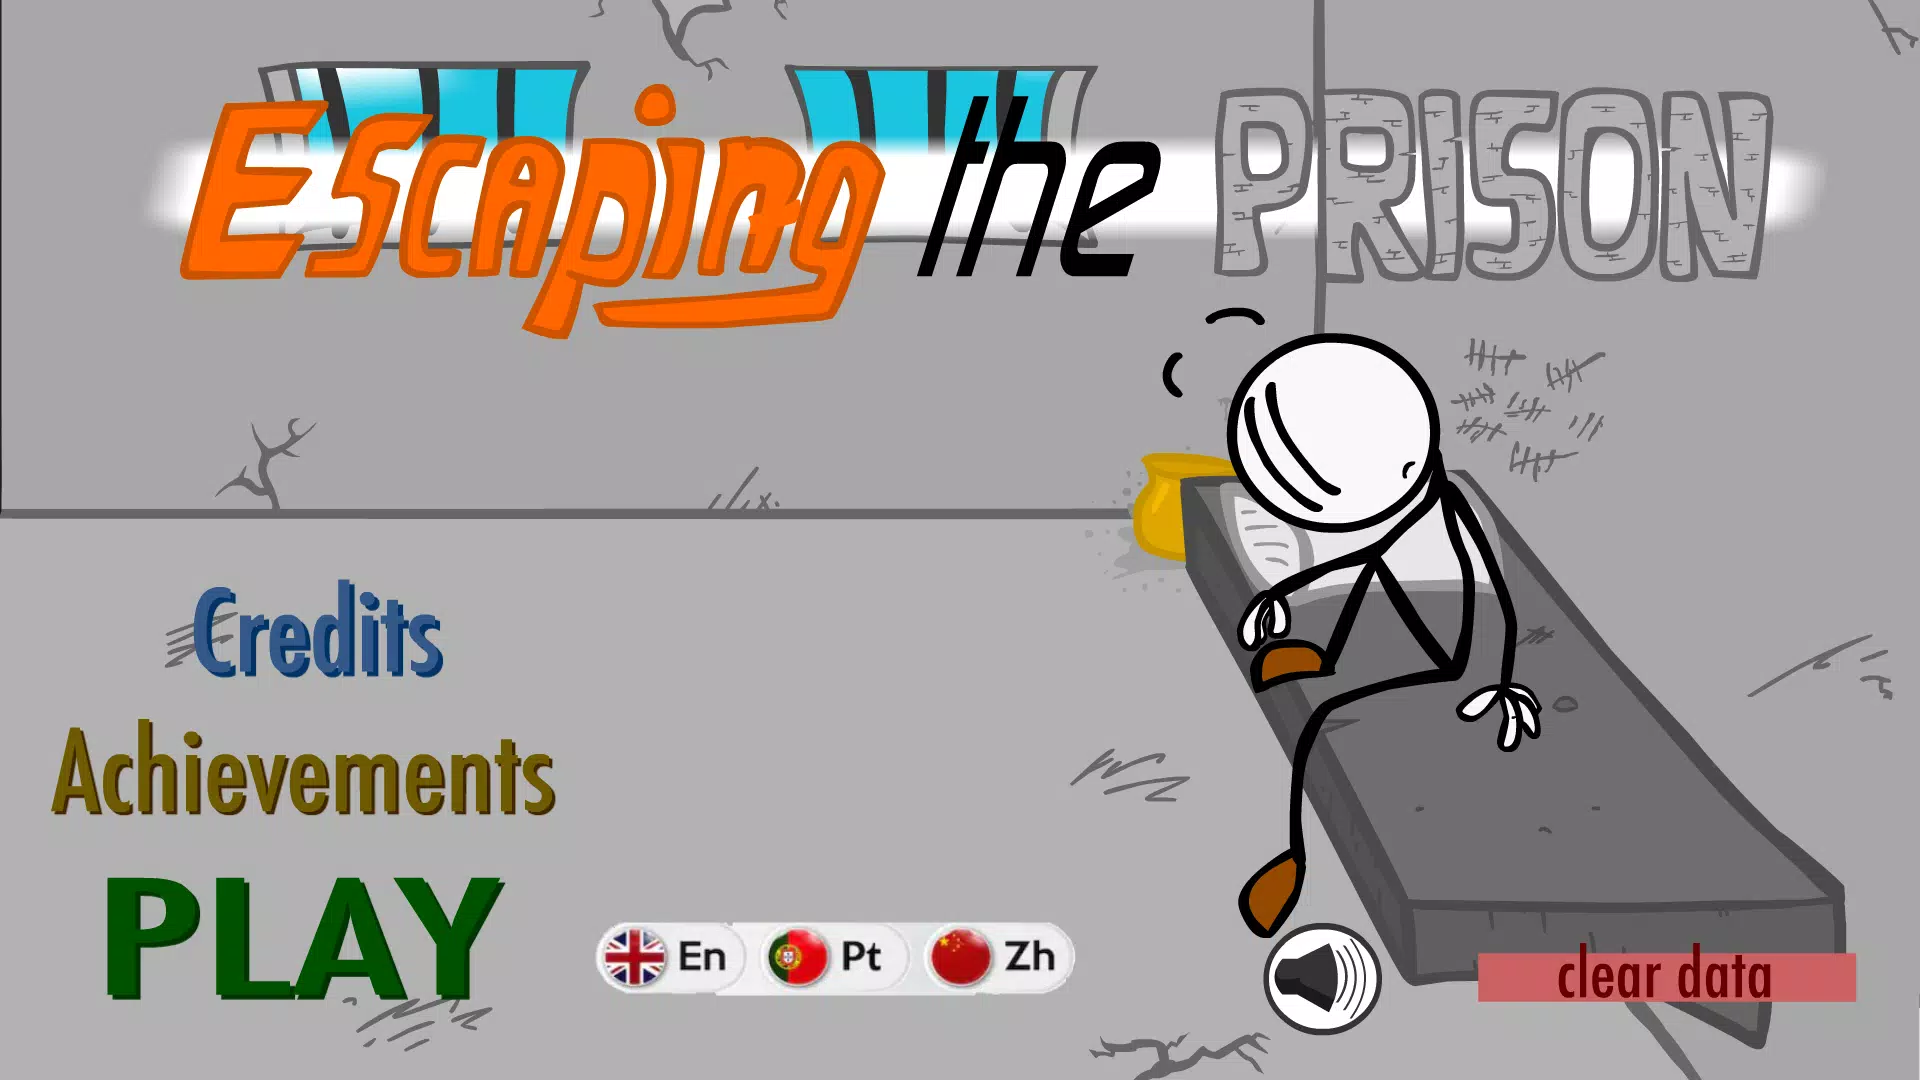 Escaping the Prison - Play Escaping the Prison on